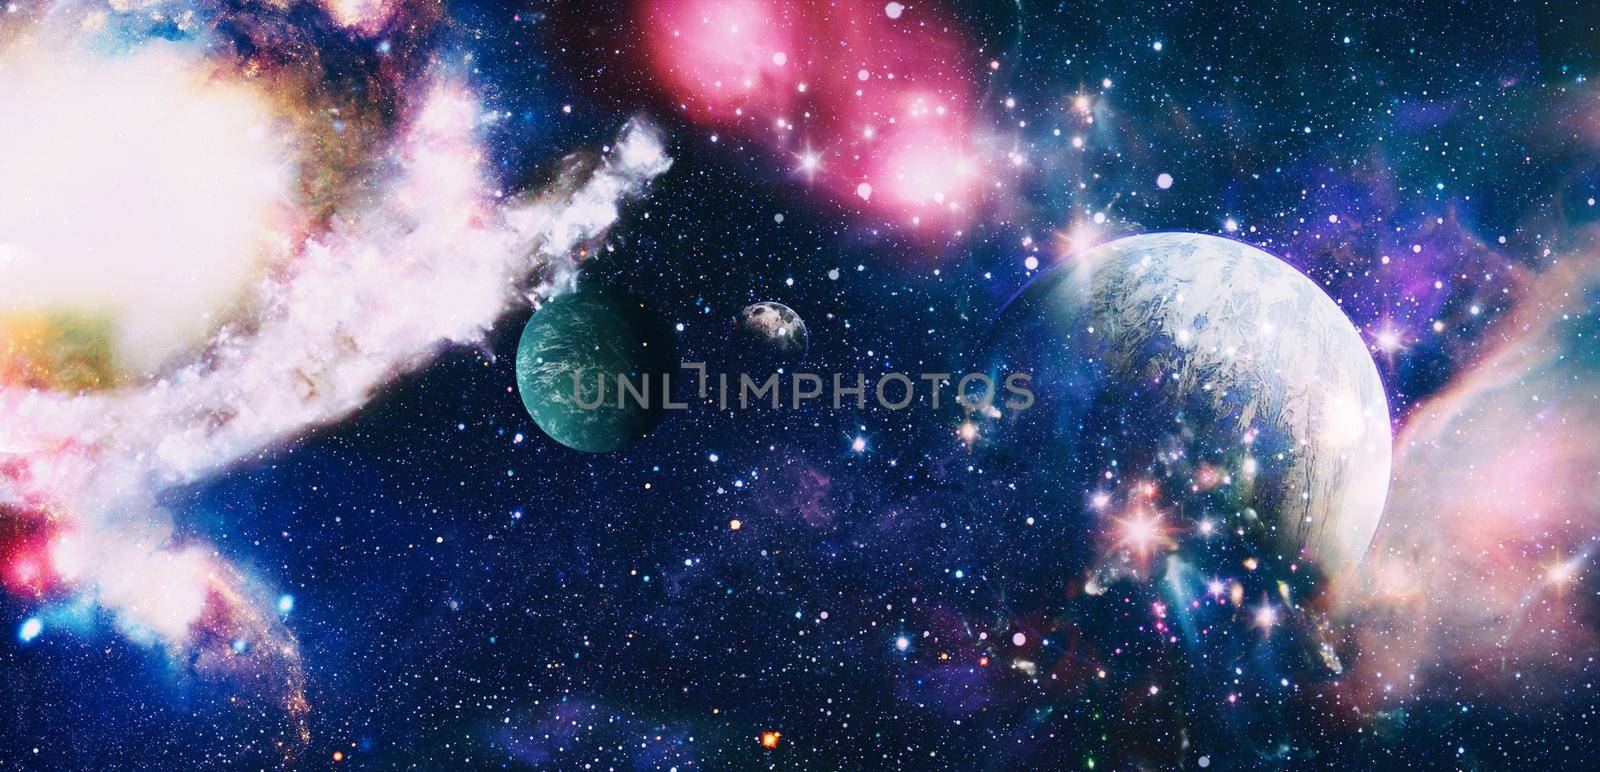 Outer space showing the beauty of space exploration. Distant galaxy. Abstract image. Elements of this image furnished by NASA by Maximusnd